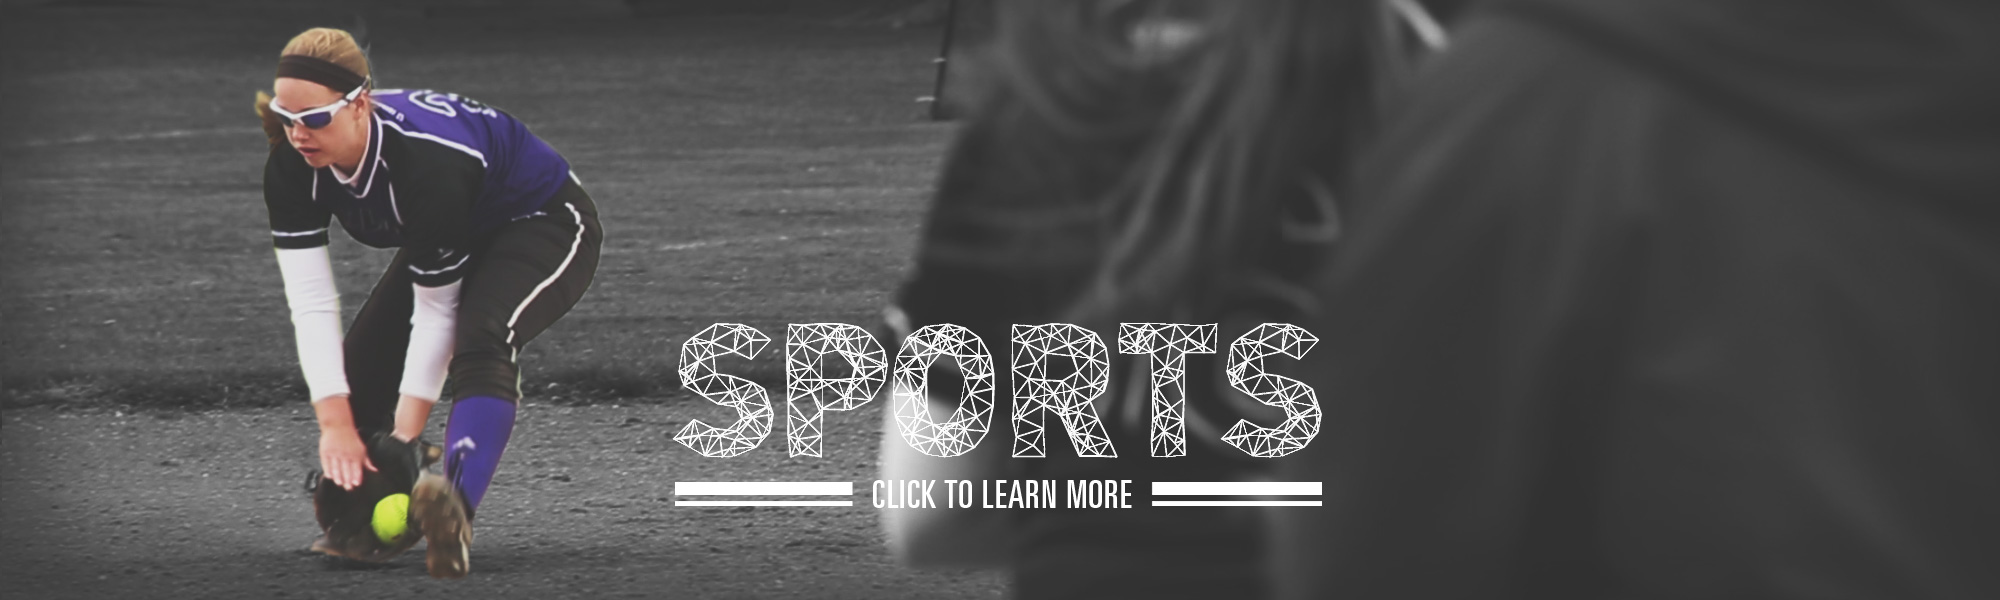 Sports Videography - Recuiting Highlights Videos